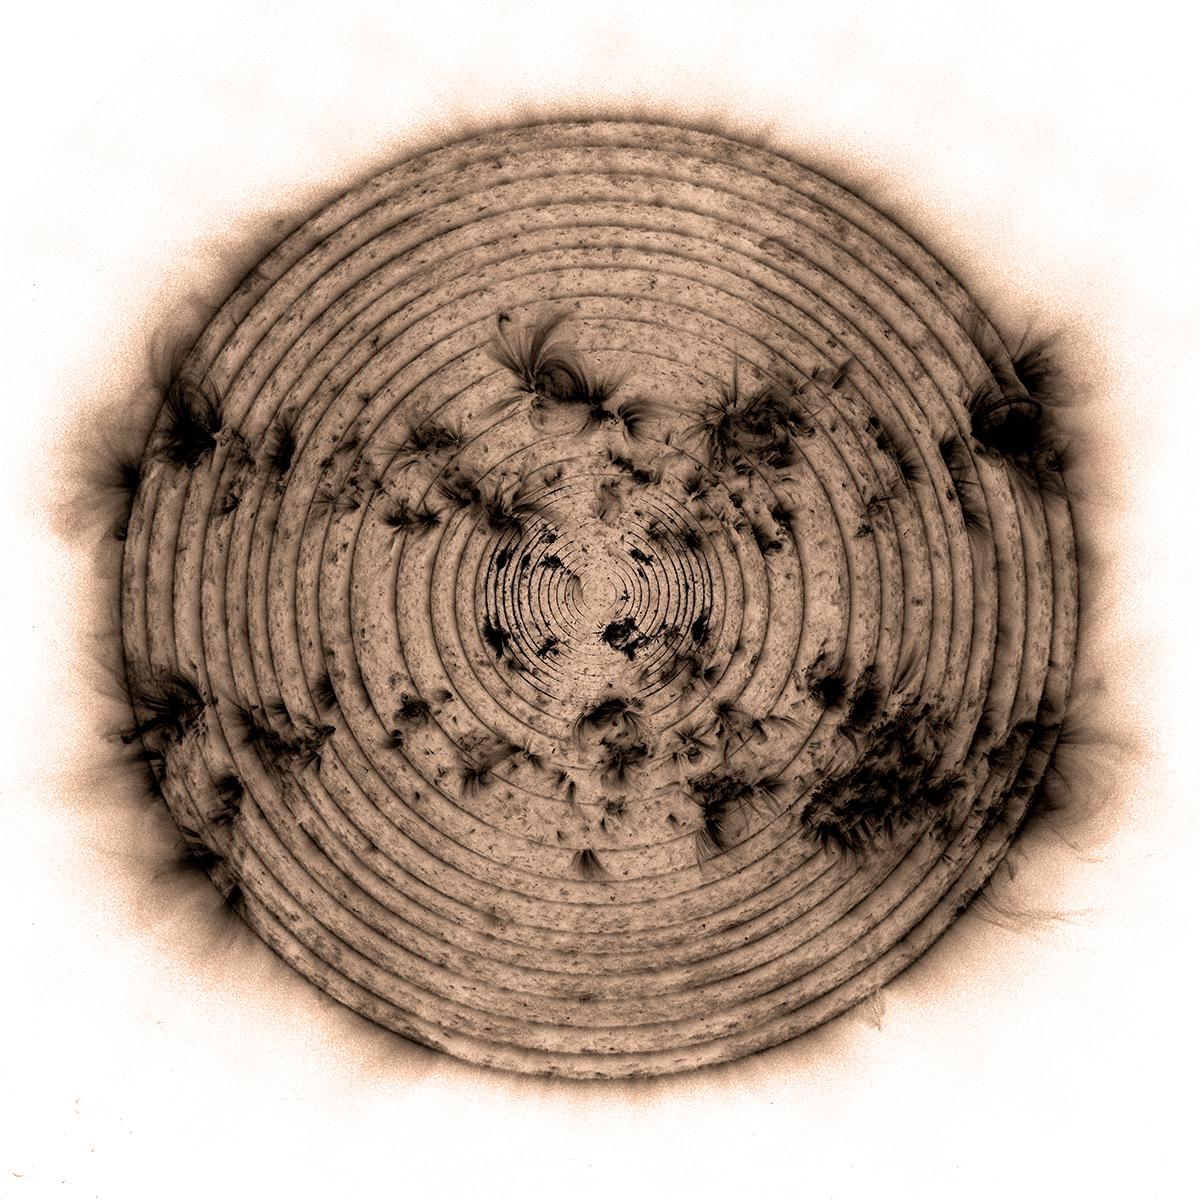 26 images of Sun from first part of solar cycle layered to create concentric rings, rendered in brown resembling a tree's rings